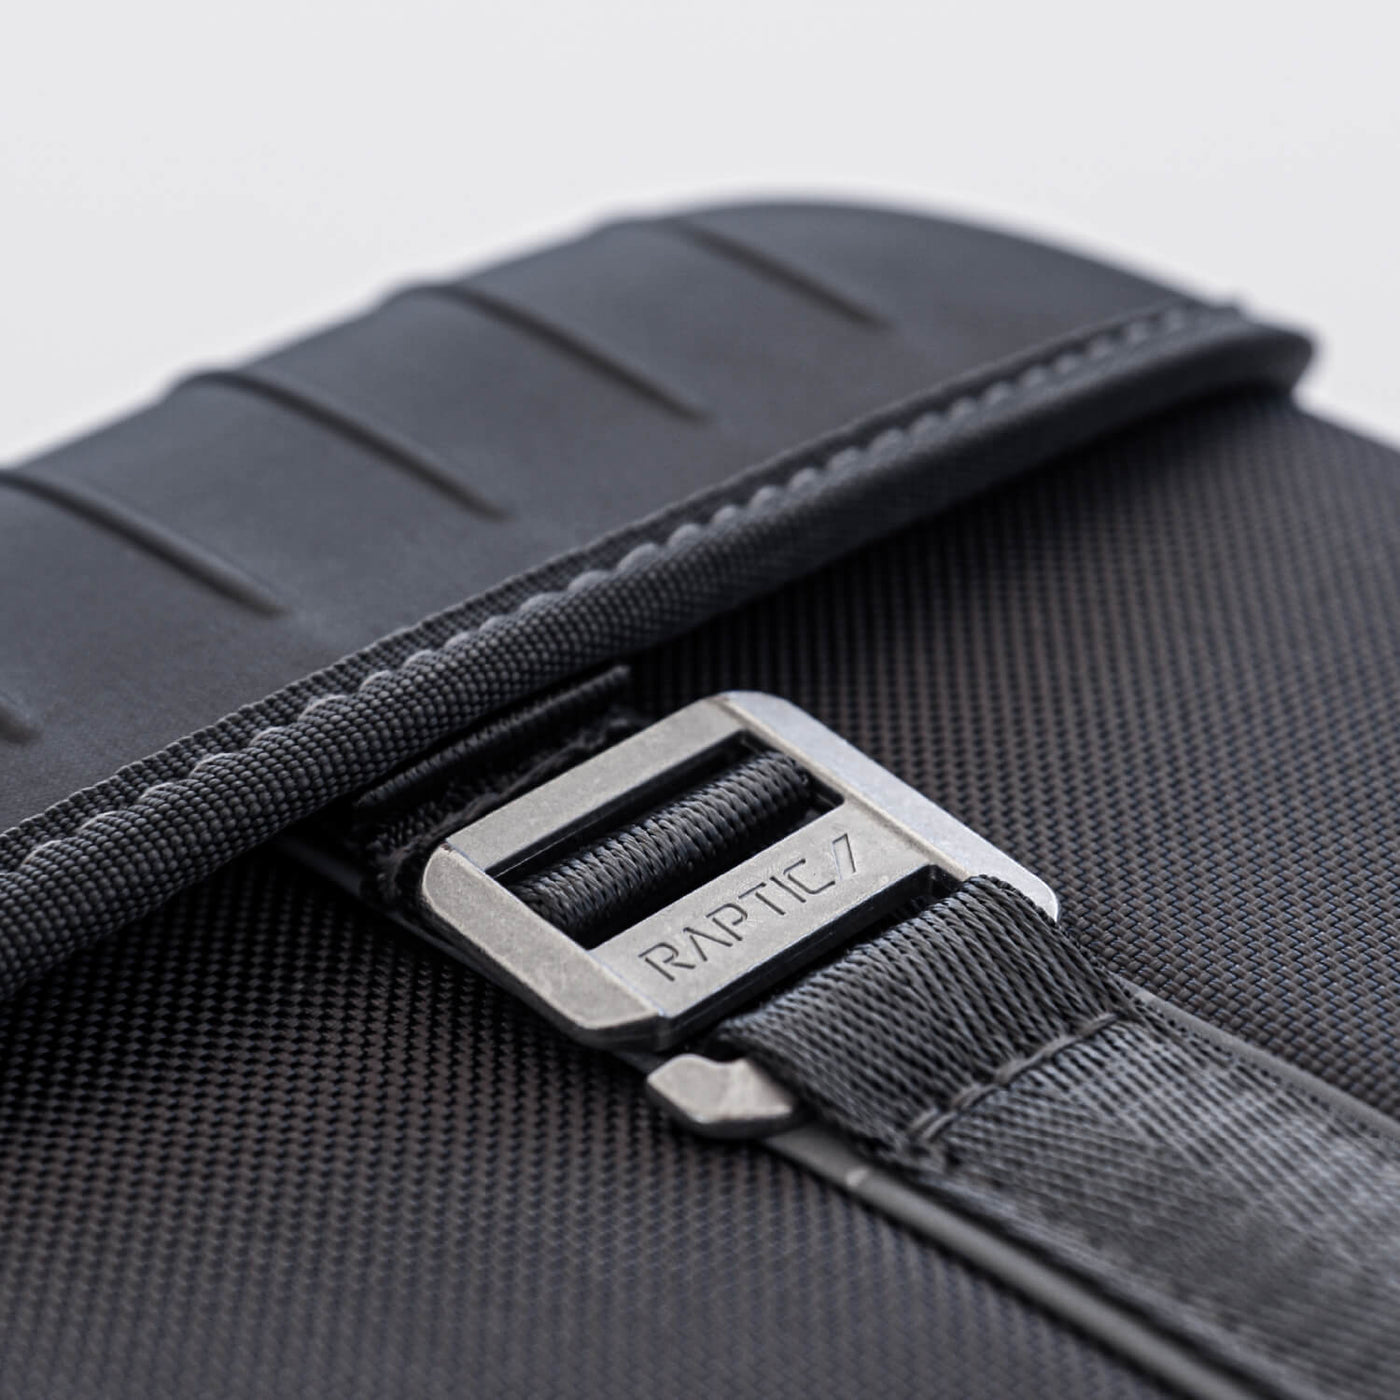 Close up of front of Smartform Case closed to show the clasp mechanism on the front.